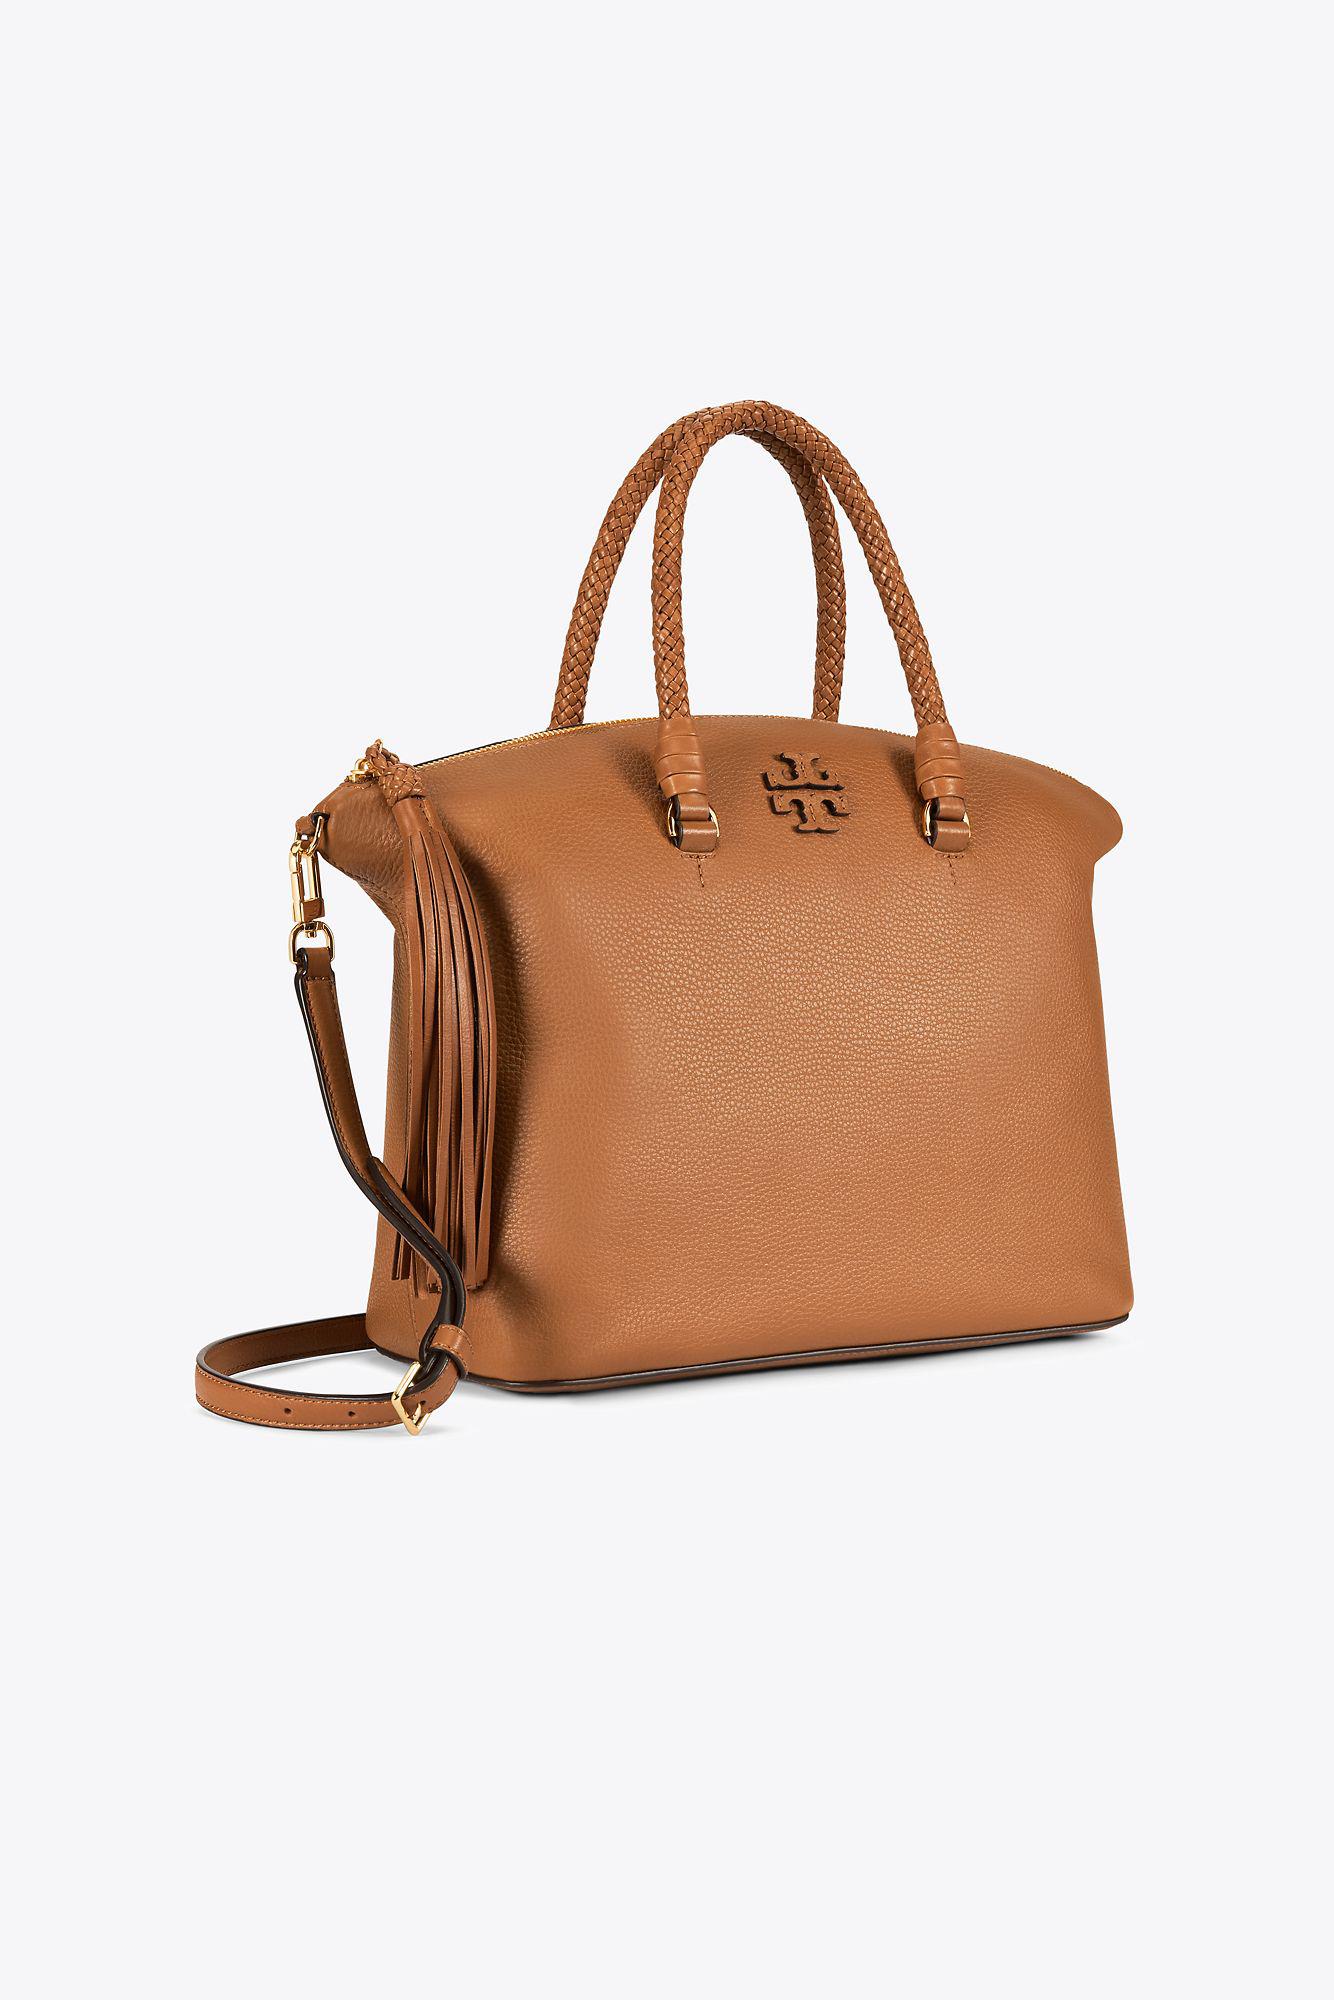 Tory Burch Taylor Leather Satchel in Brown | Lyst